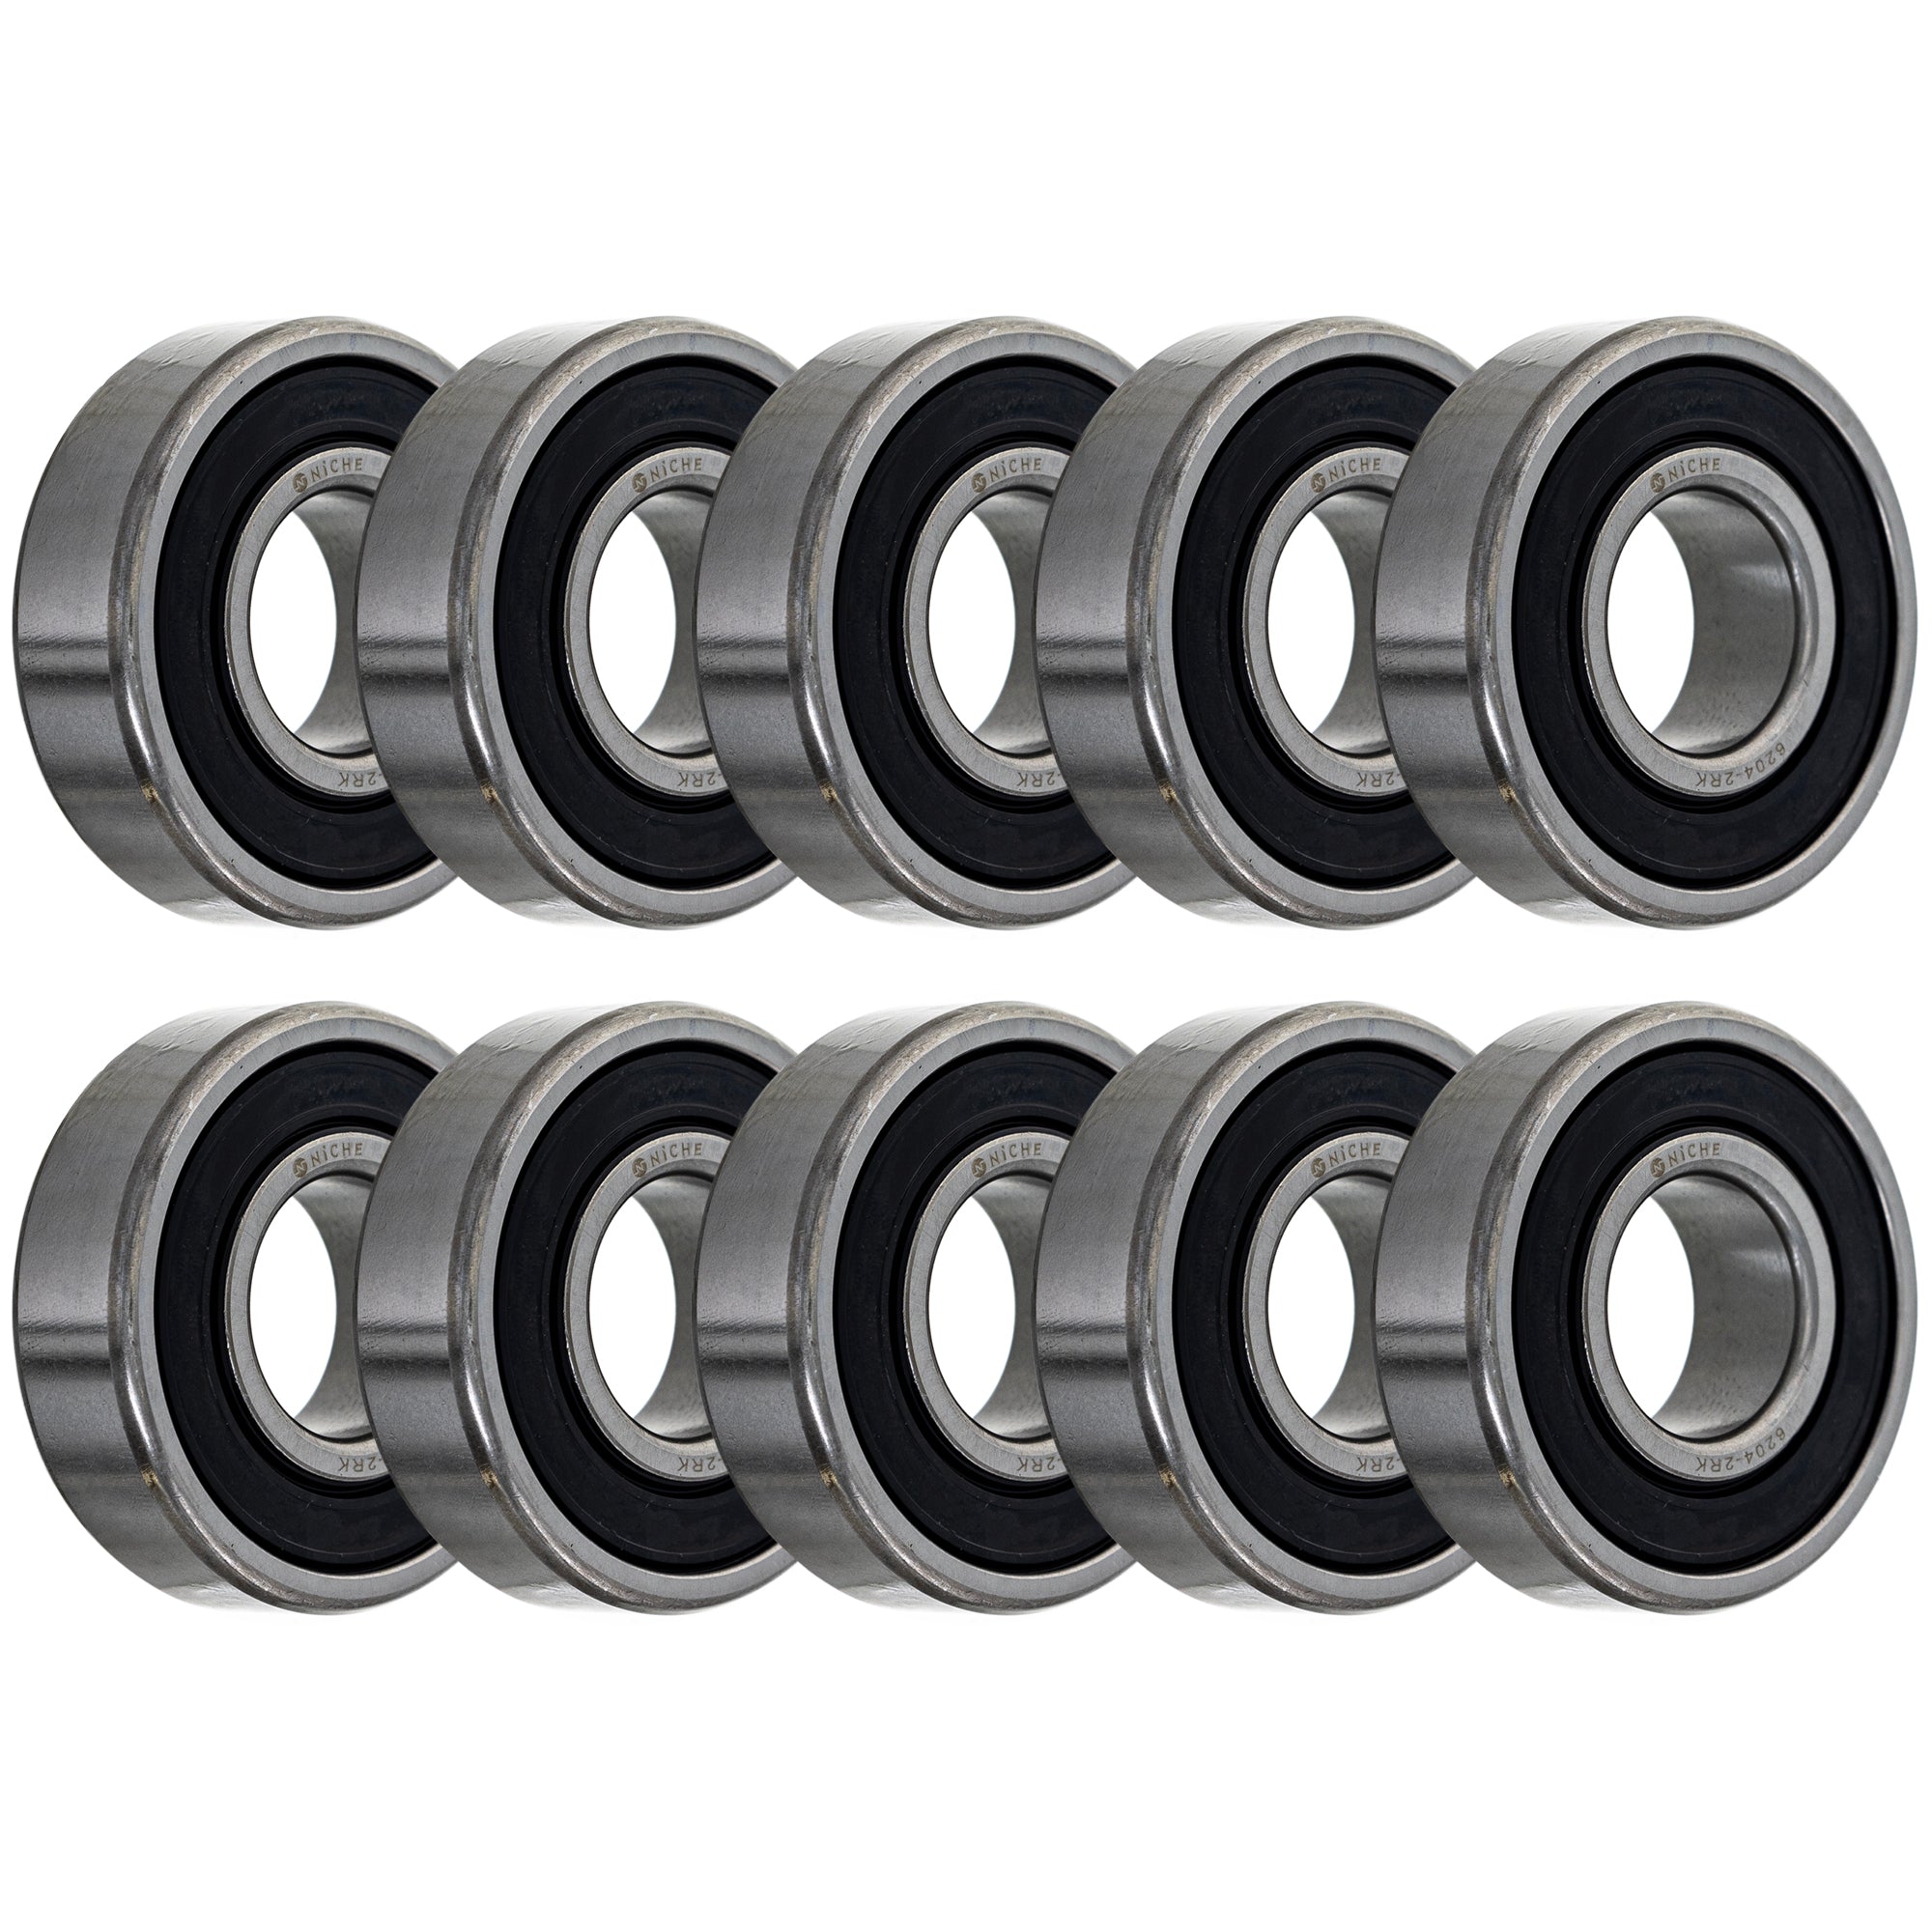 Electric Grade, Single Row, Deep Groove, Ball Bearing Pack of 10 10-Pack for zOTHER SV650S NICHE 519-CBB2281R